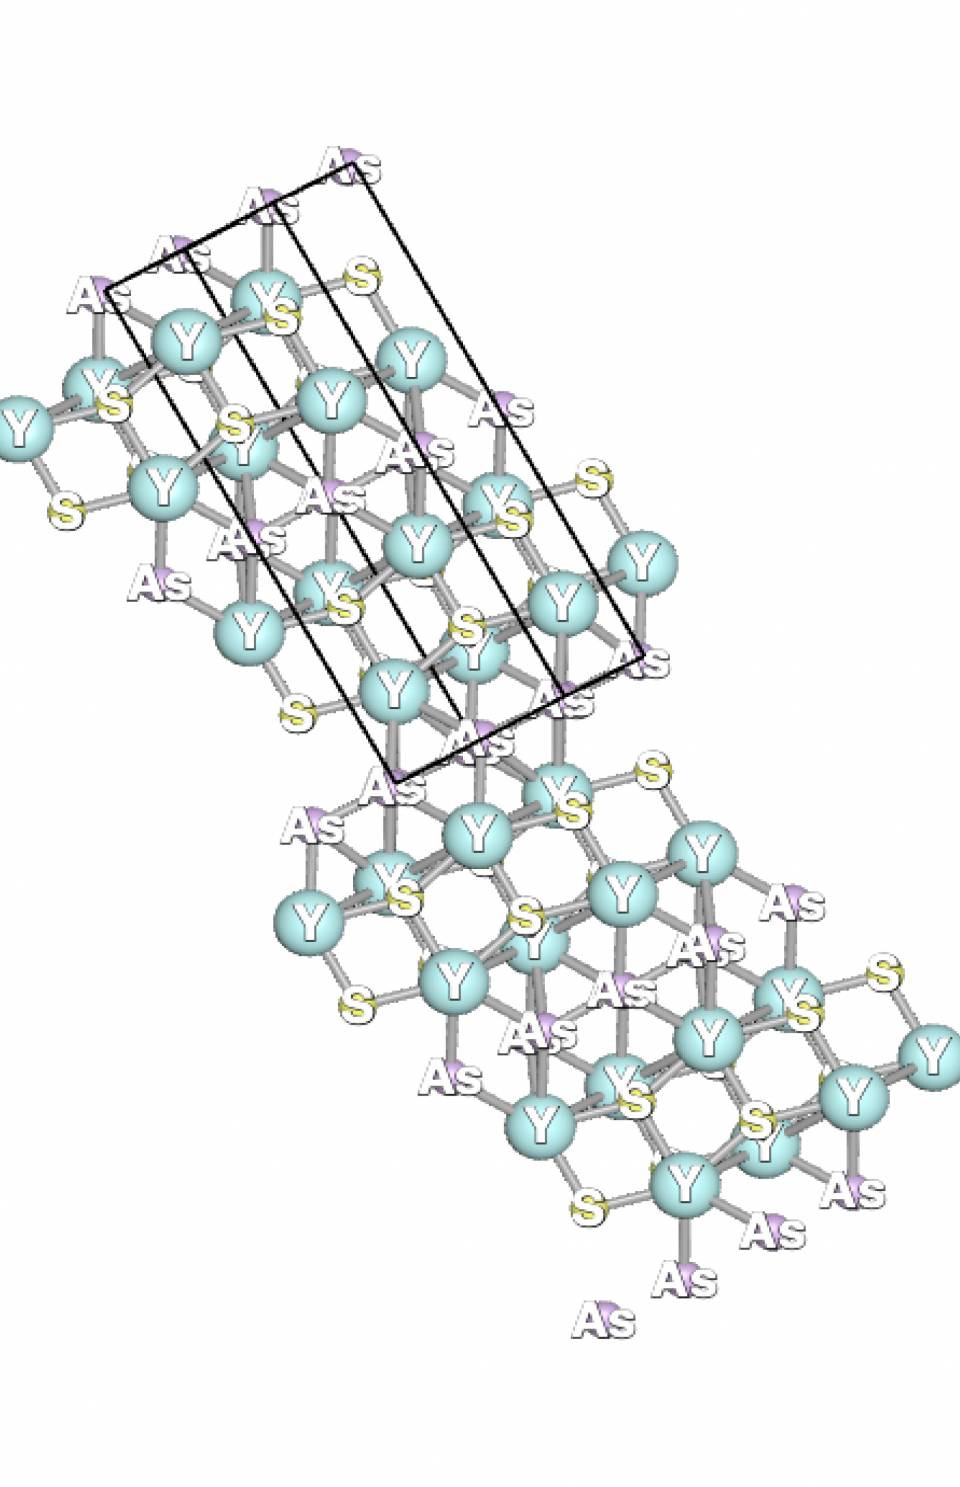 3D diagrama of a material's crystal structure